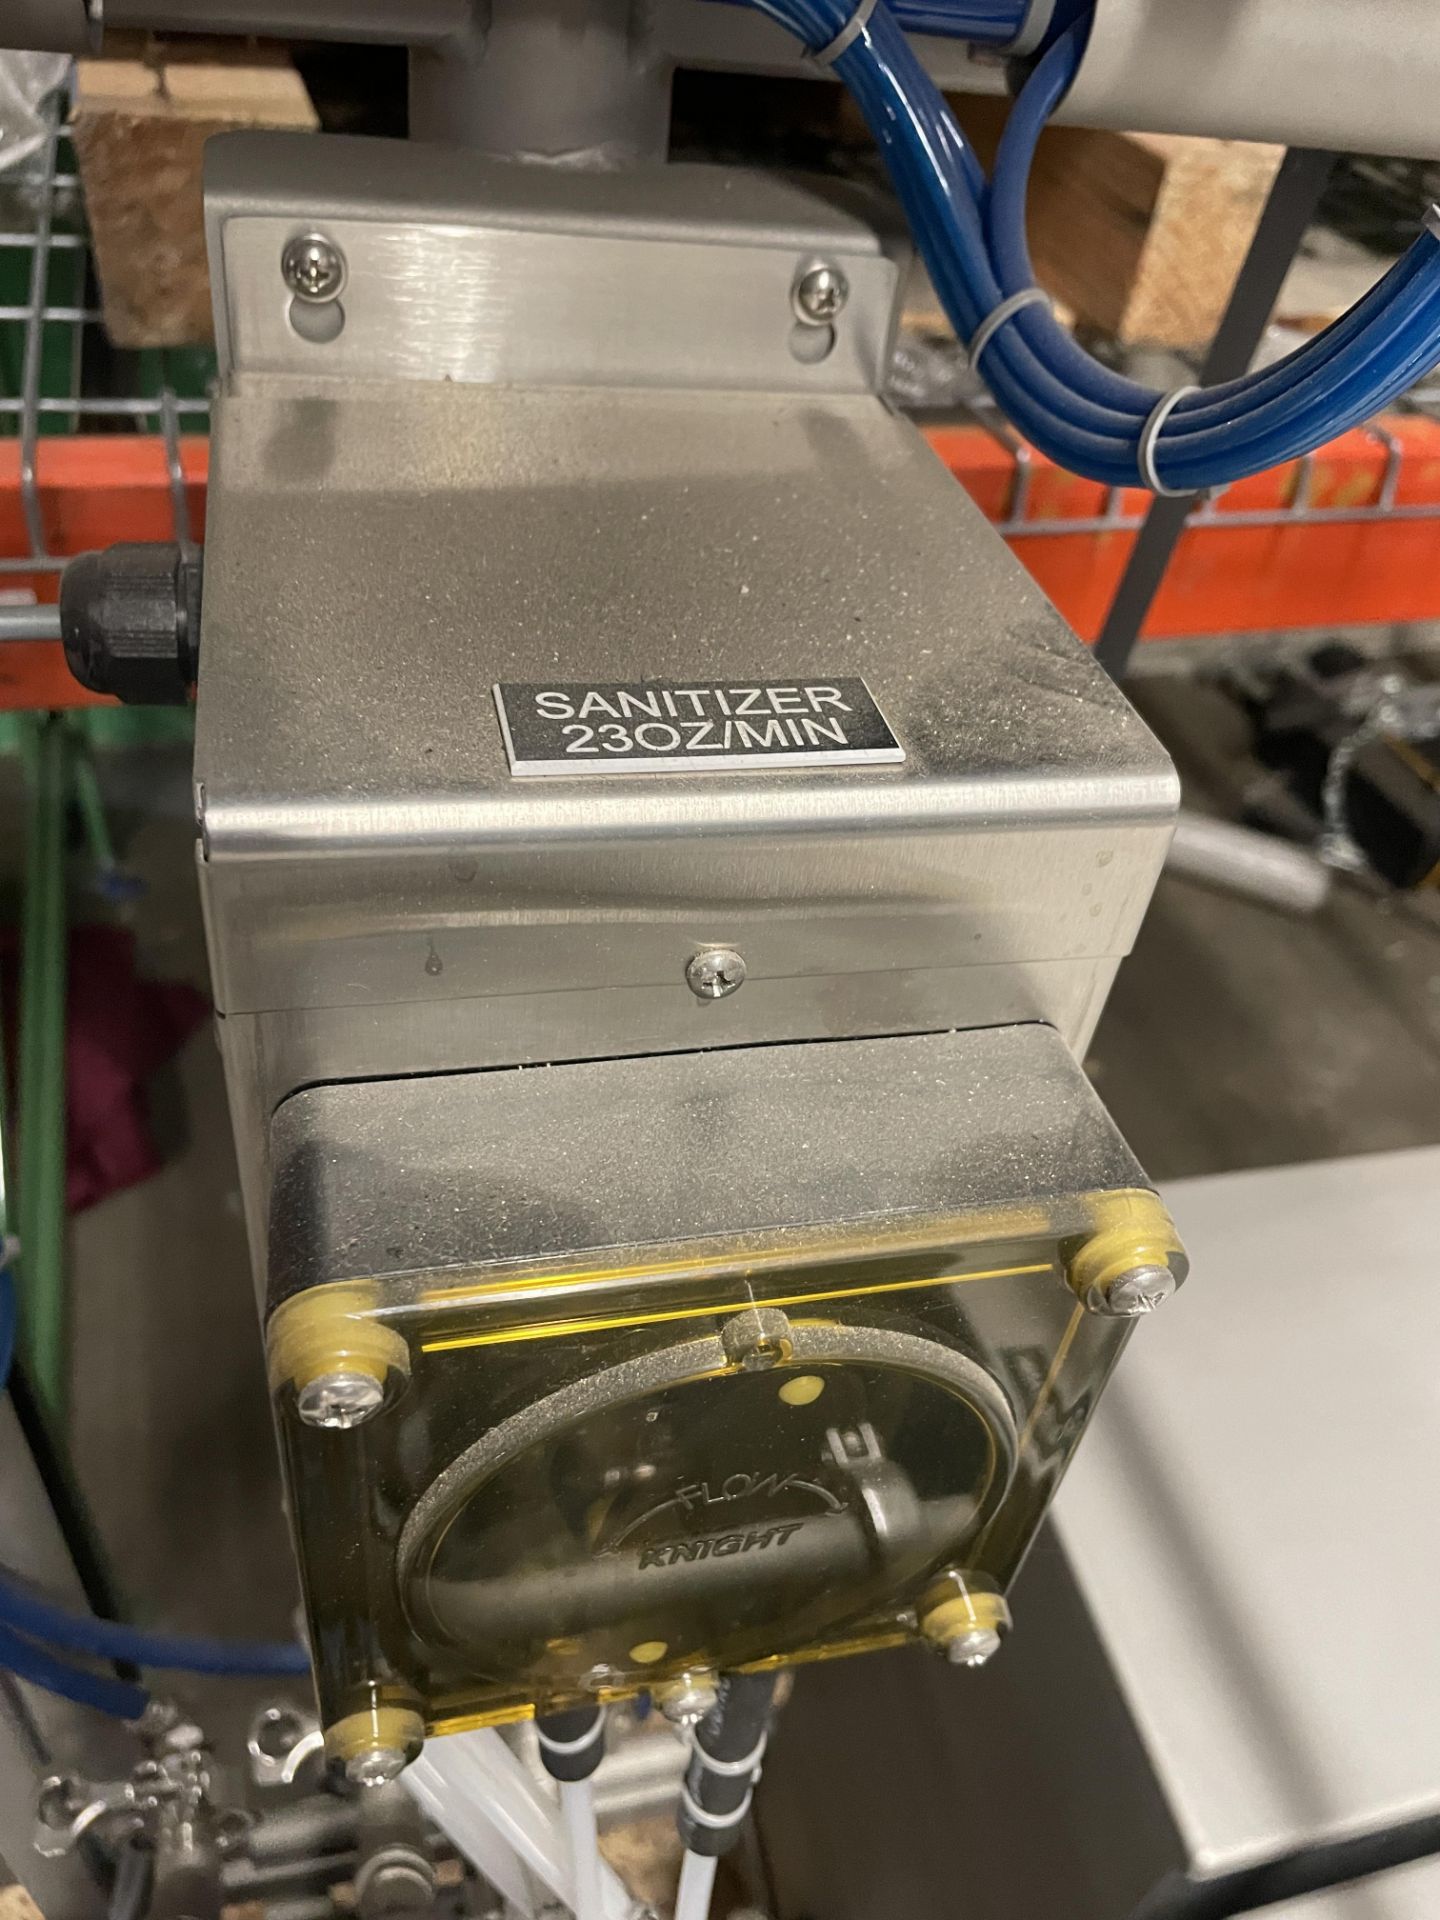 2020 Premier #KW-SA-3V-CS-A 3 Head Stainless Keg Washer, 3 Phase, 208-230VAC, 60Hz, S/N: 20KW019 (Se - Image 11 of 17